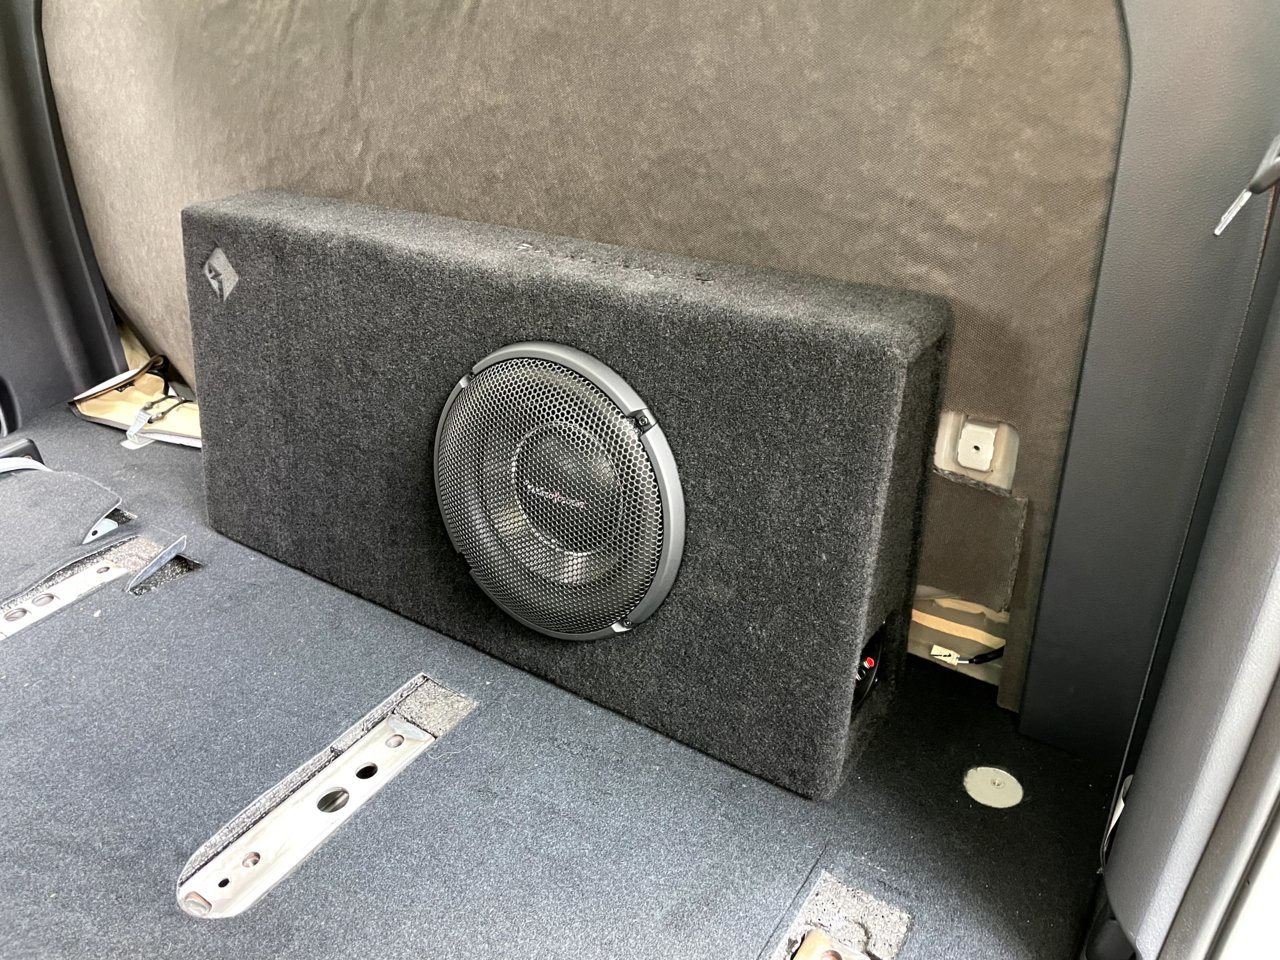 2021 JBL - 5-CH Amp + Mono Amp / Subwoofer added | Toyota Tundra Forum